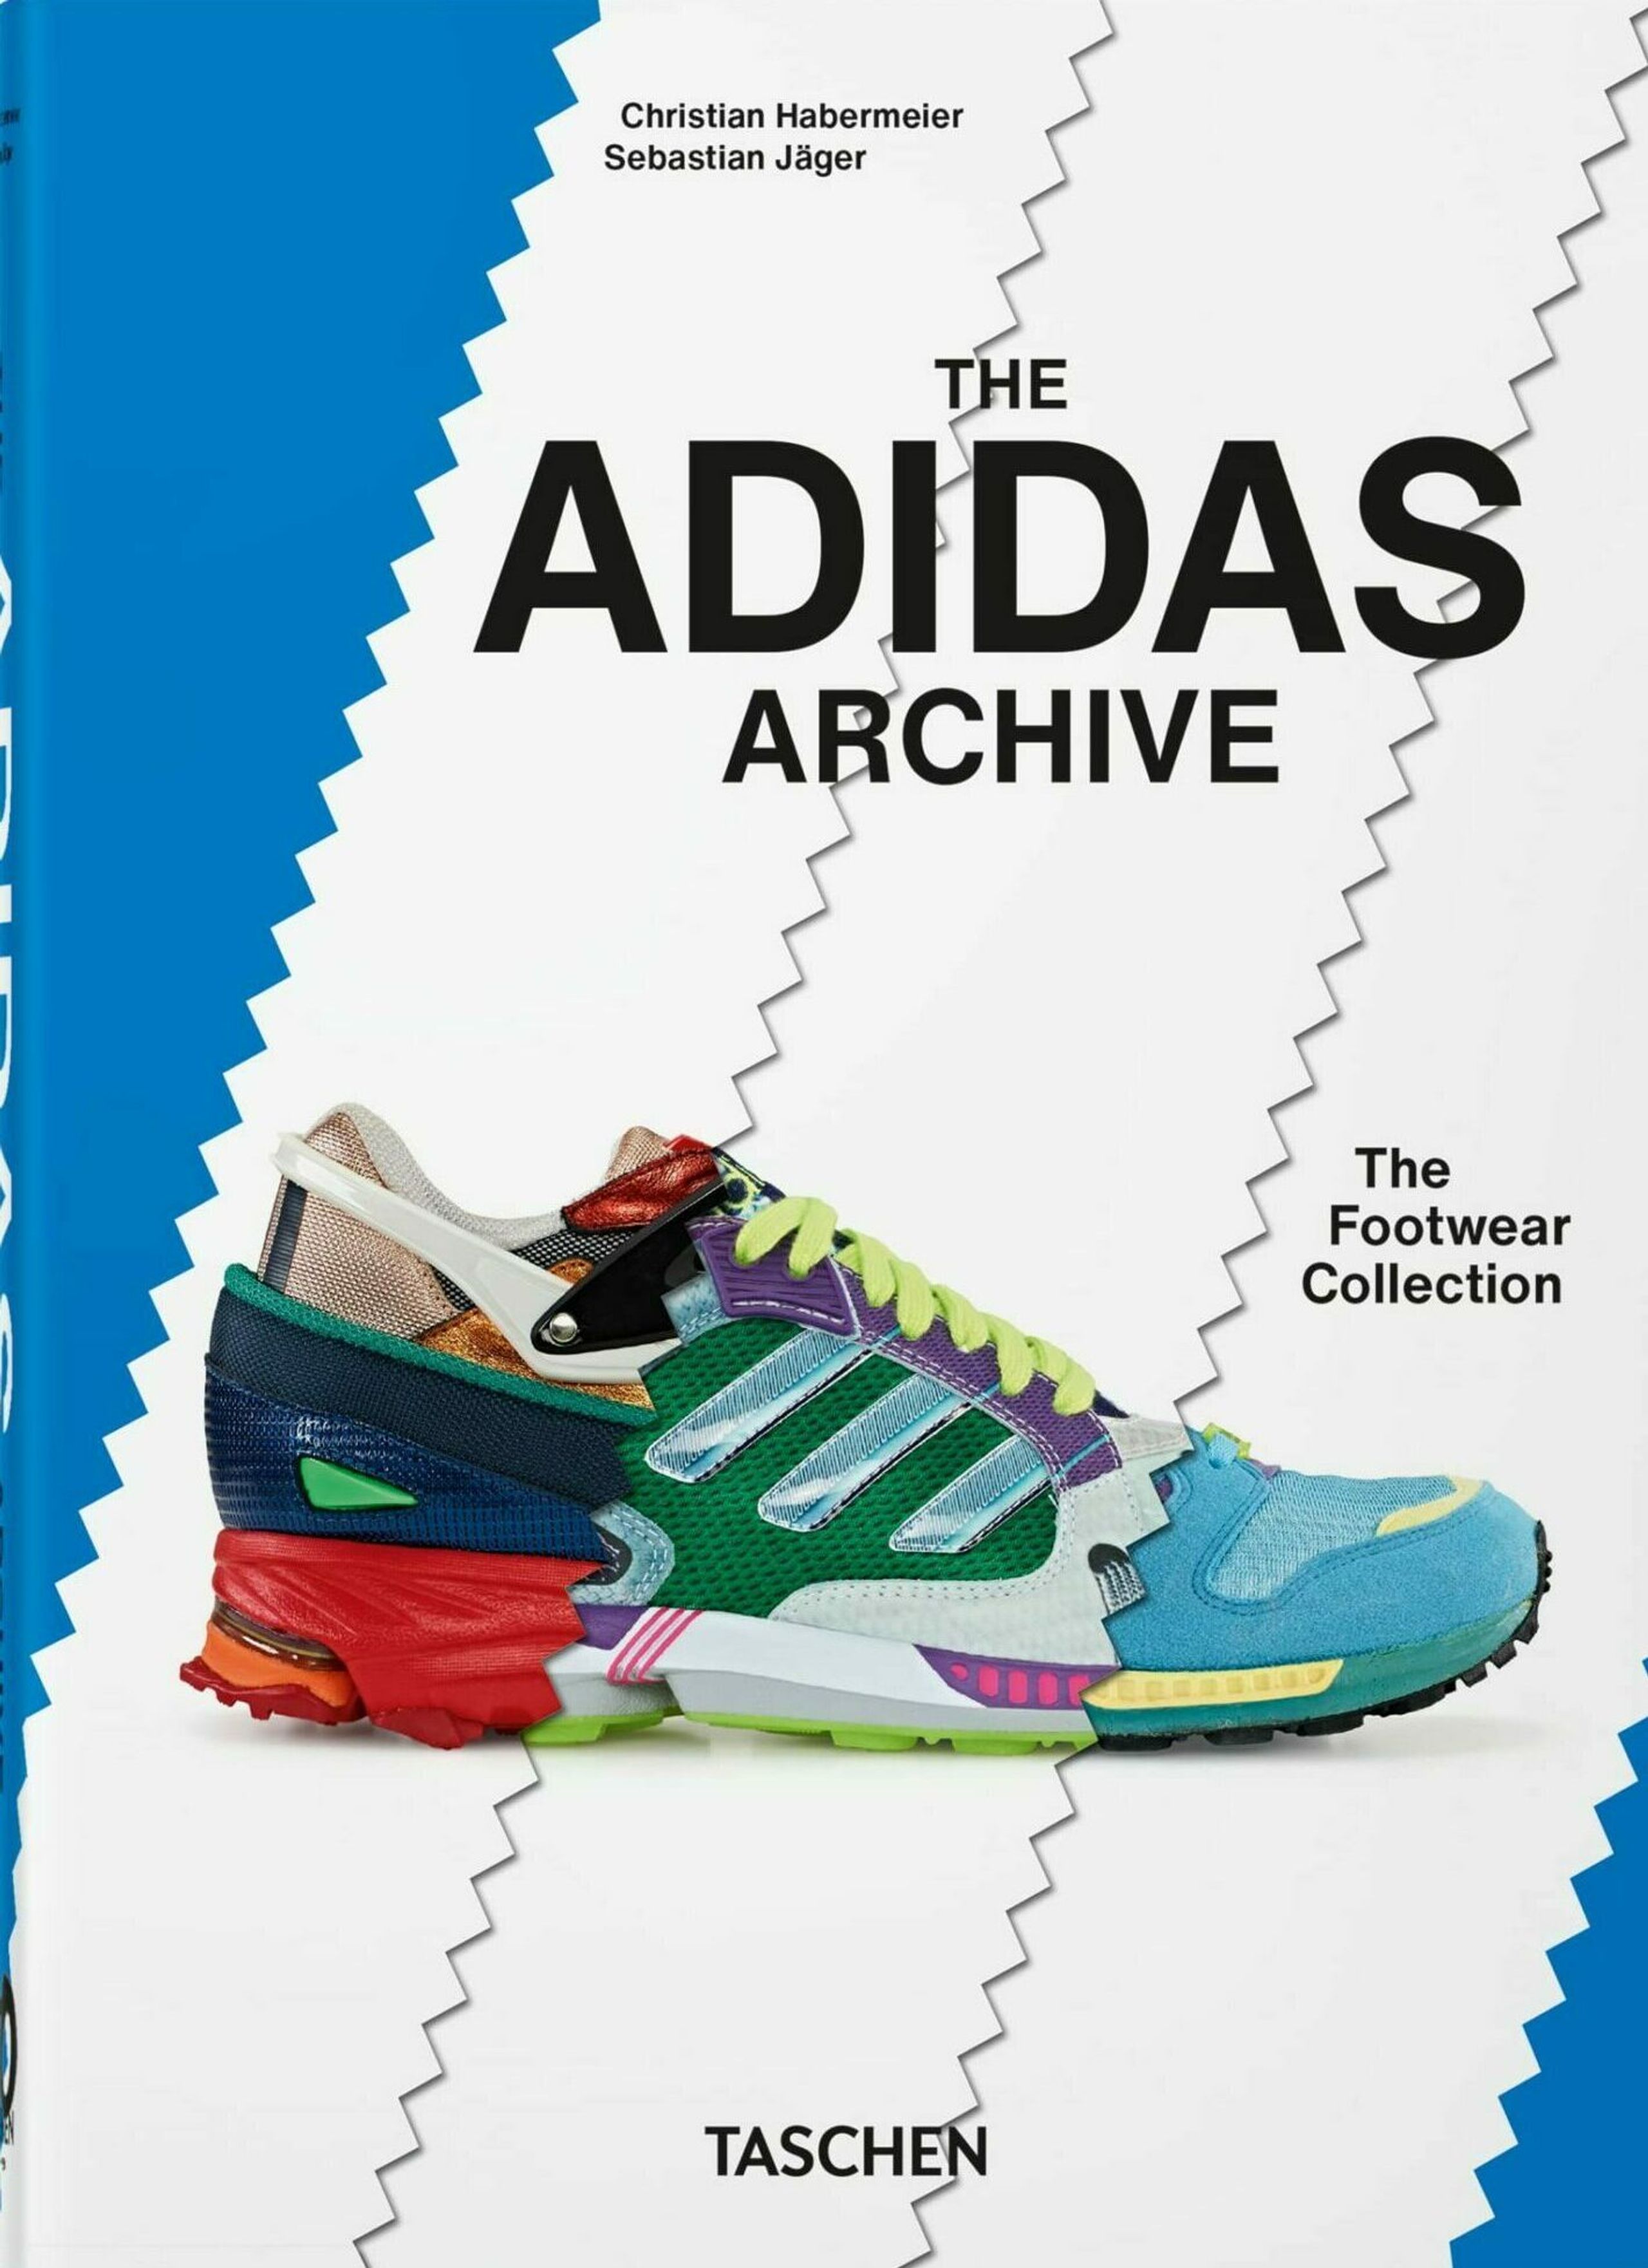 New Mags - Livro - The Adidas Archive: 40 series - Blue, White